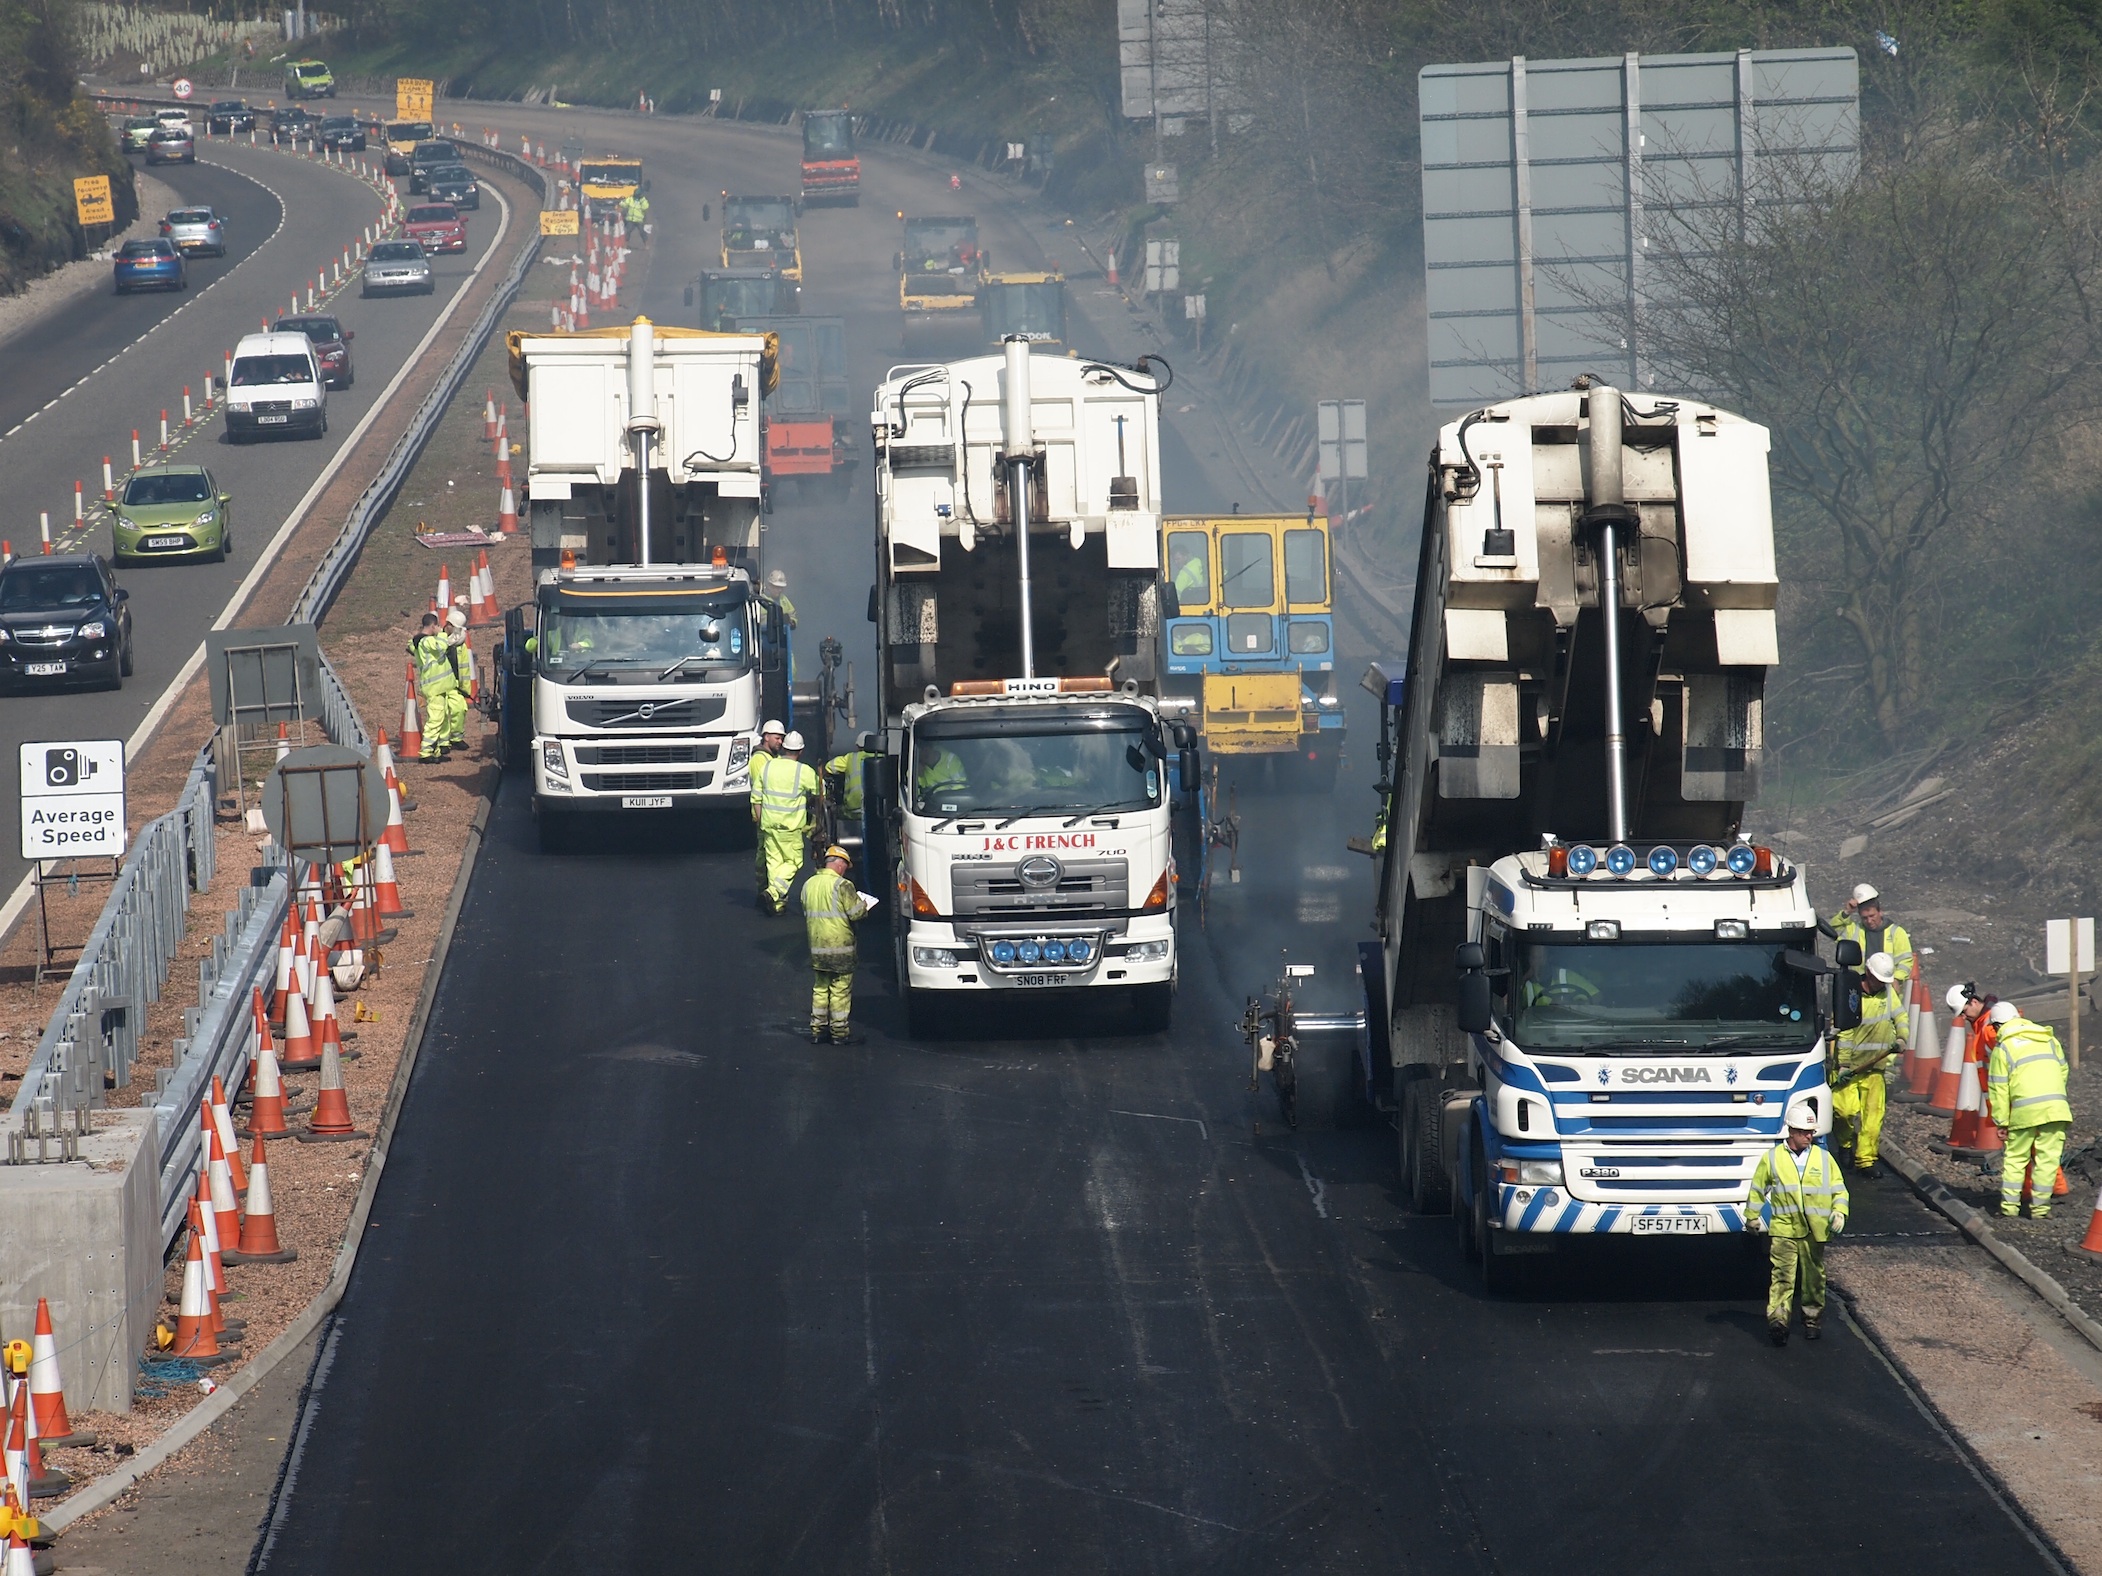 Echelon paving was used to ensure a good hot-to-hot joint